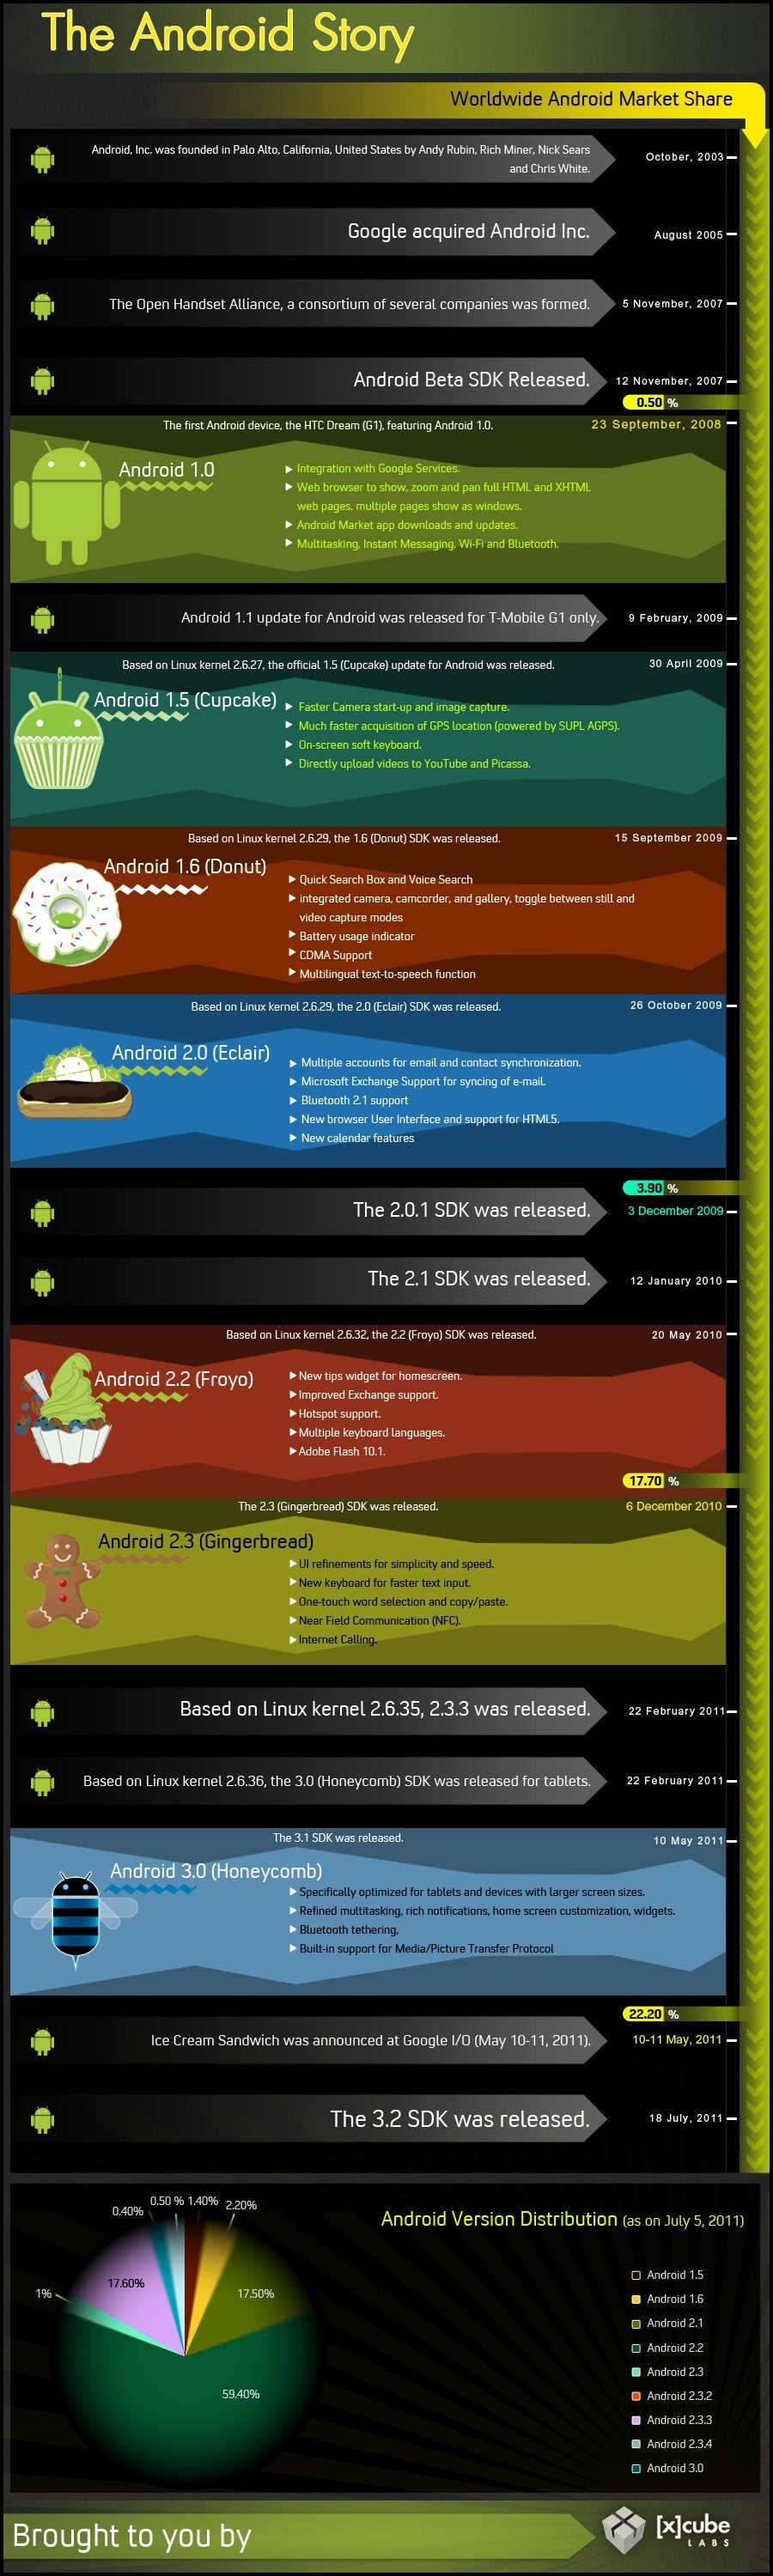 8 years of Android history at a glance in this infographic